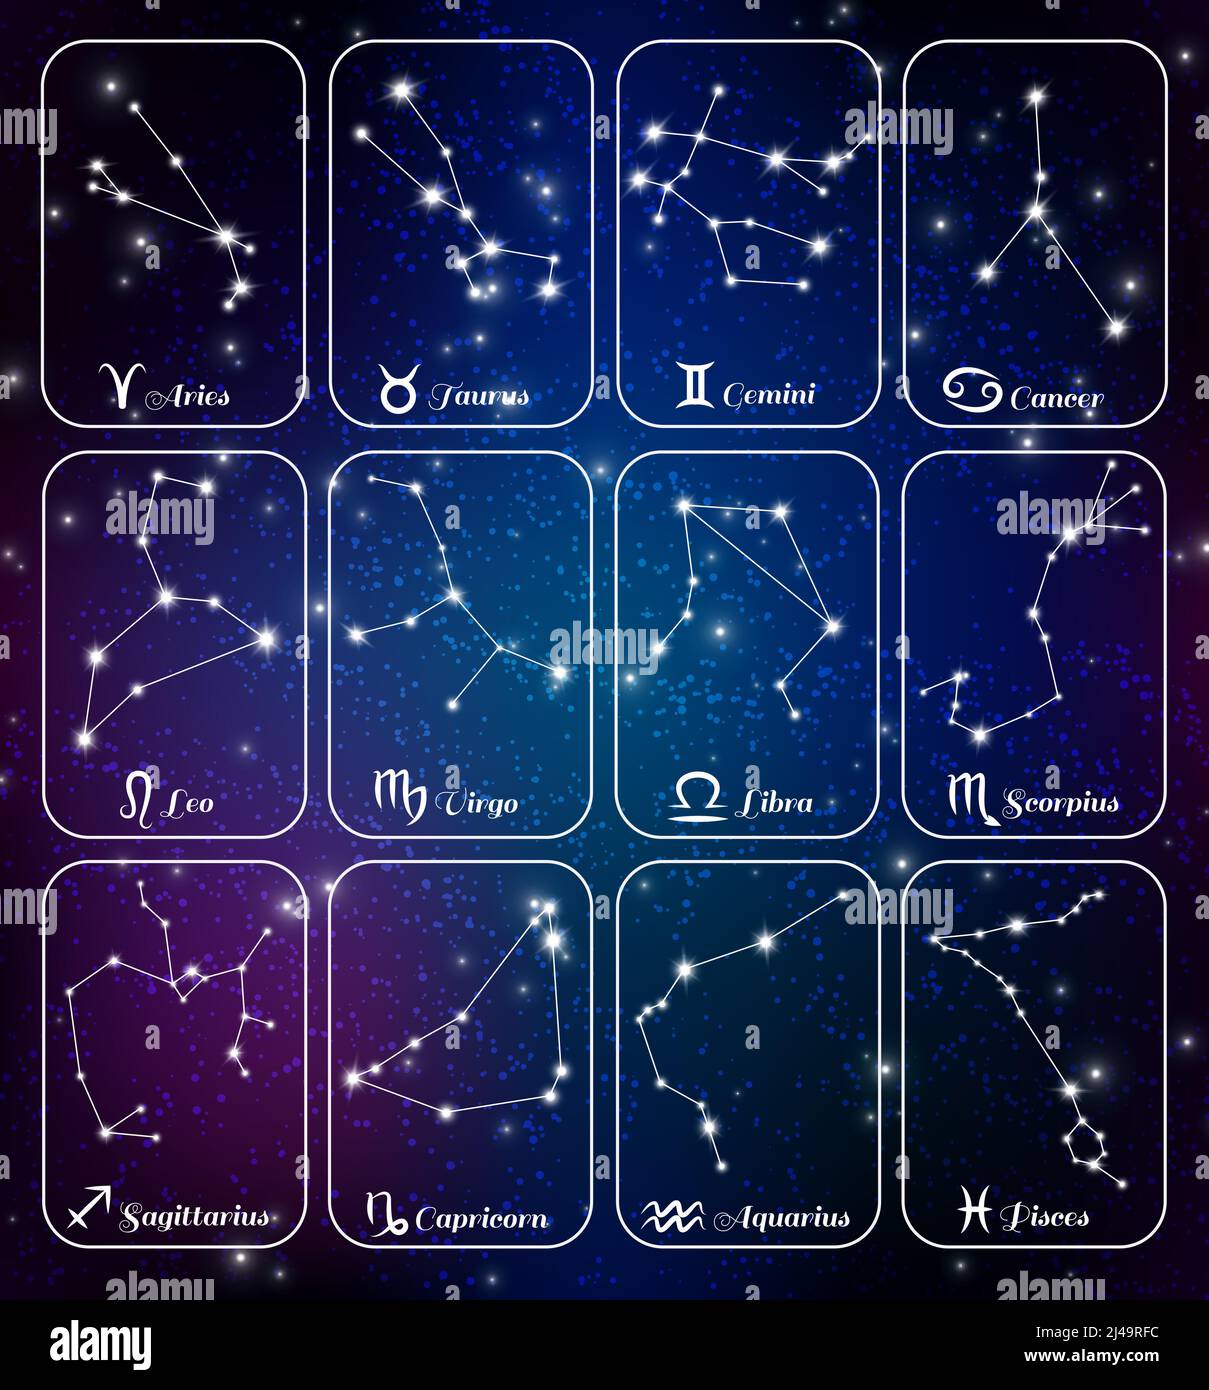 12 zodiac signs Stock Vector Images - Alamy